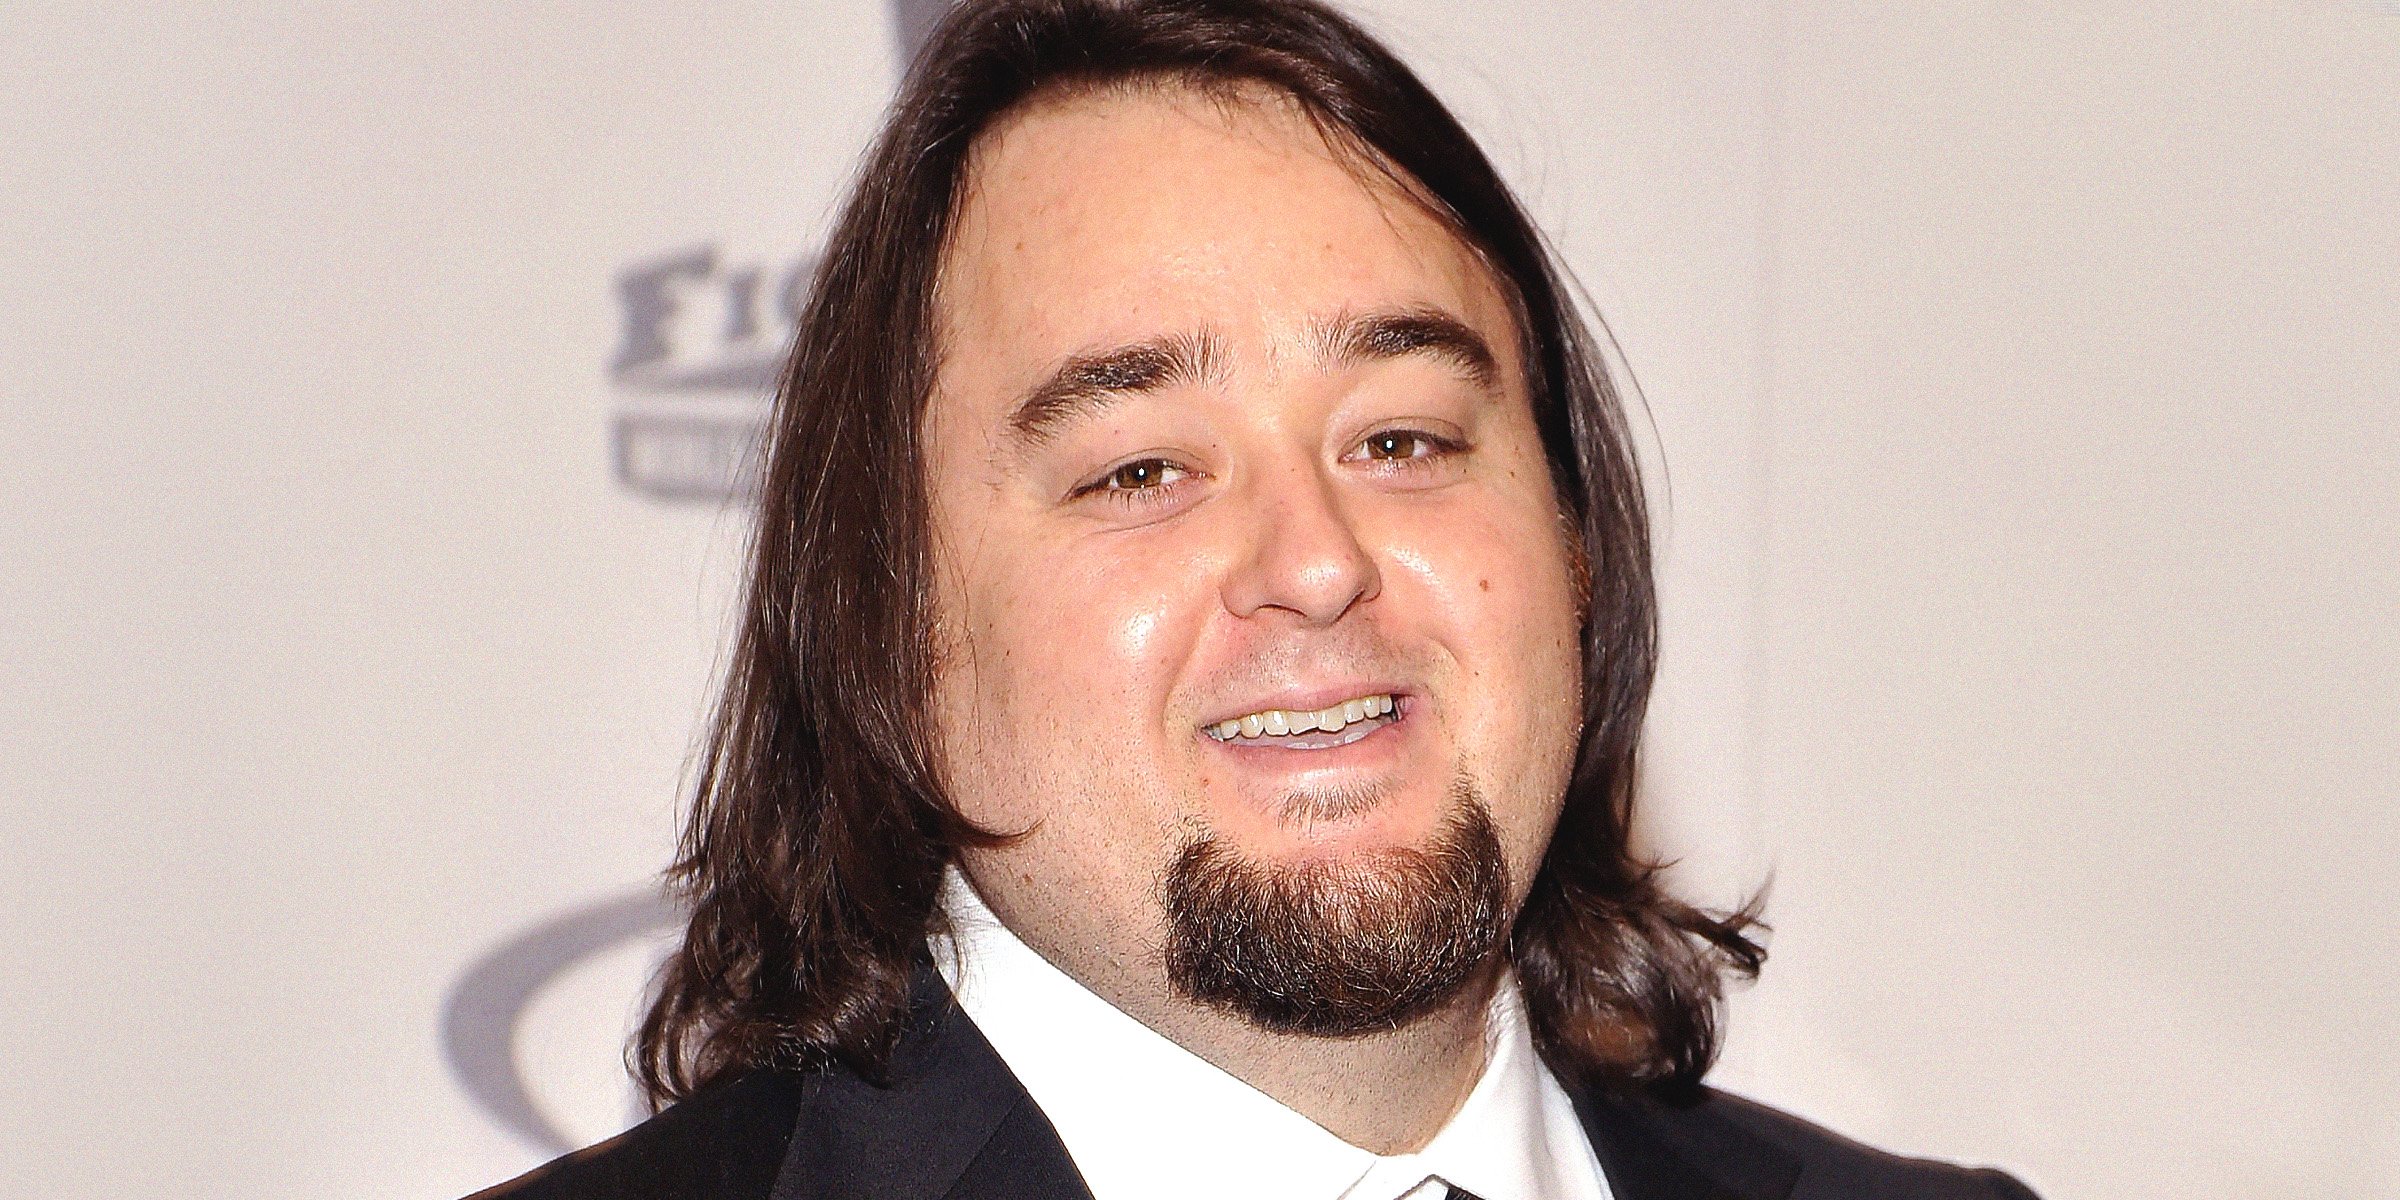 Chumlee smiling